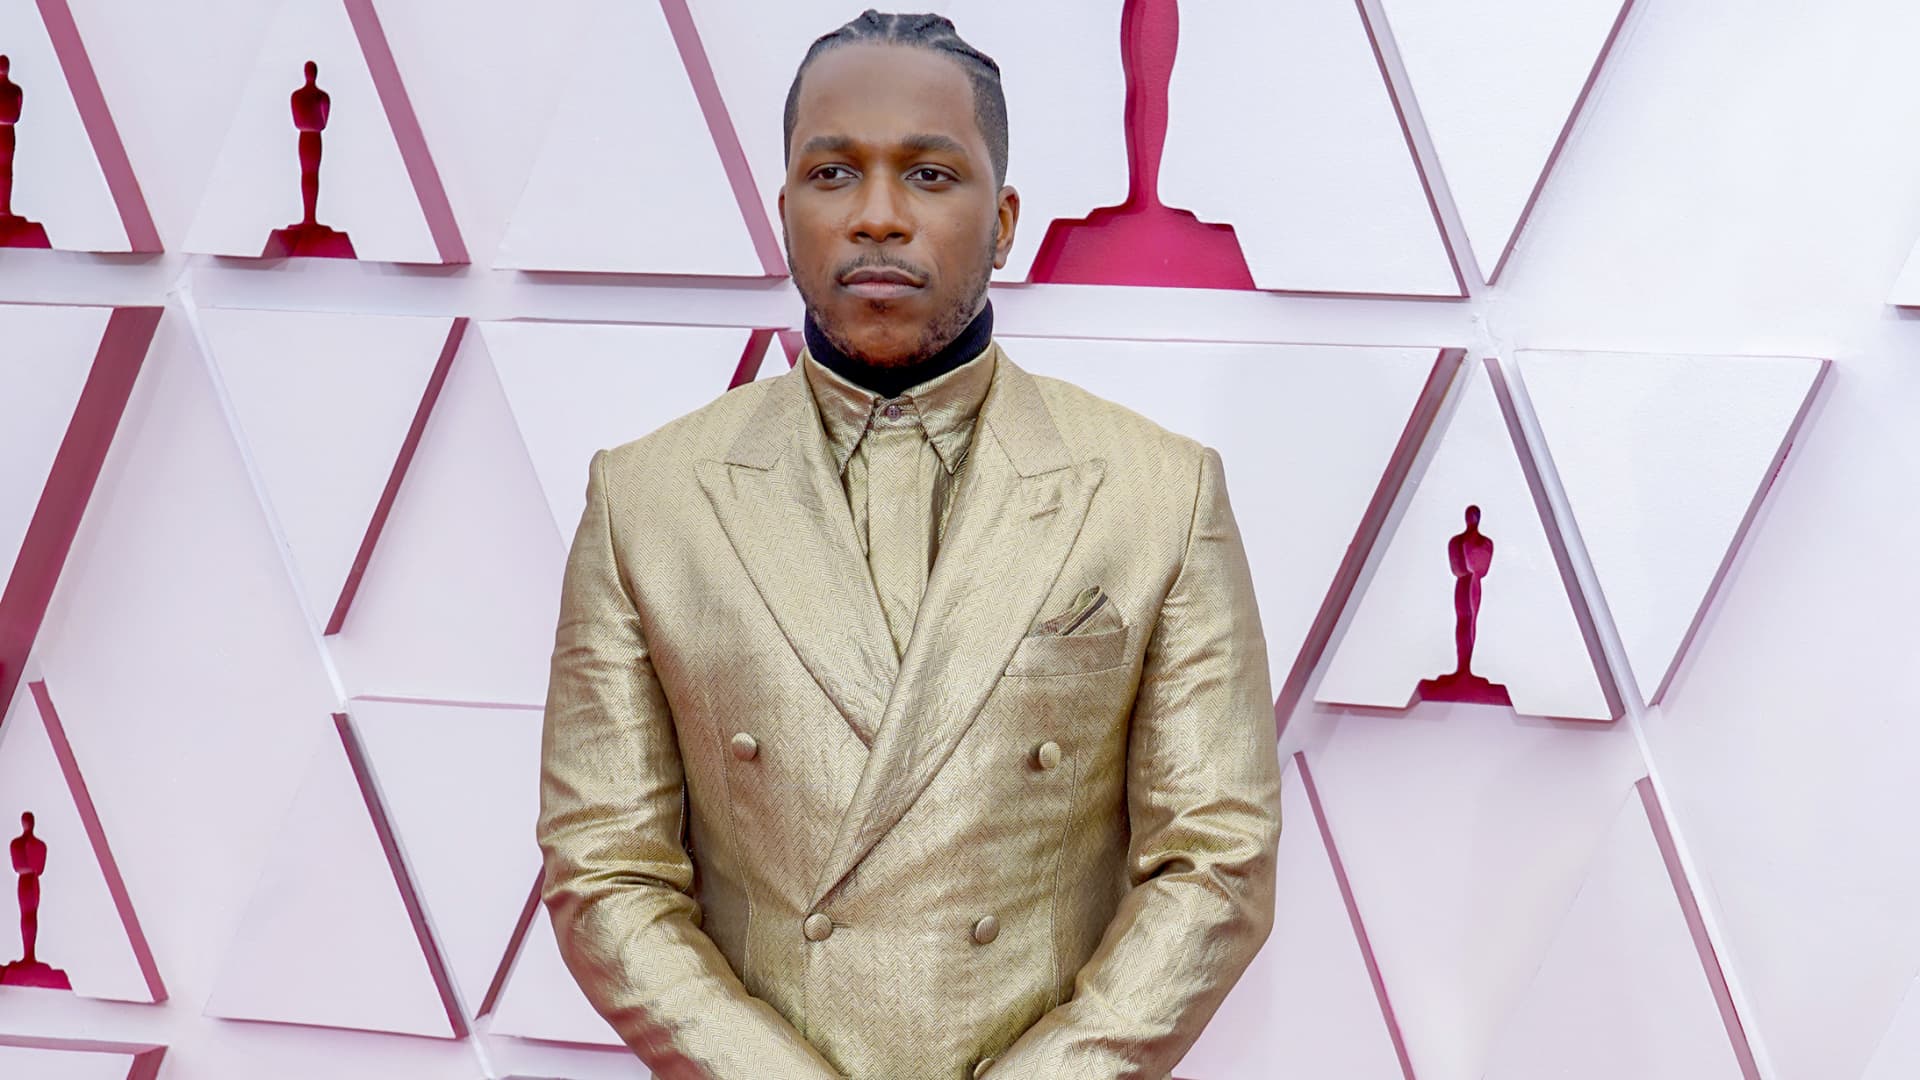 Leslie Odom Jr. attends the 93rd Annual Academy Awards at Union Station on April 25, 2021 in Los Angeles, California.